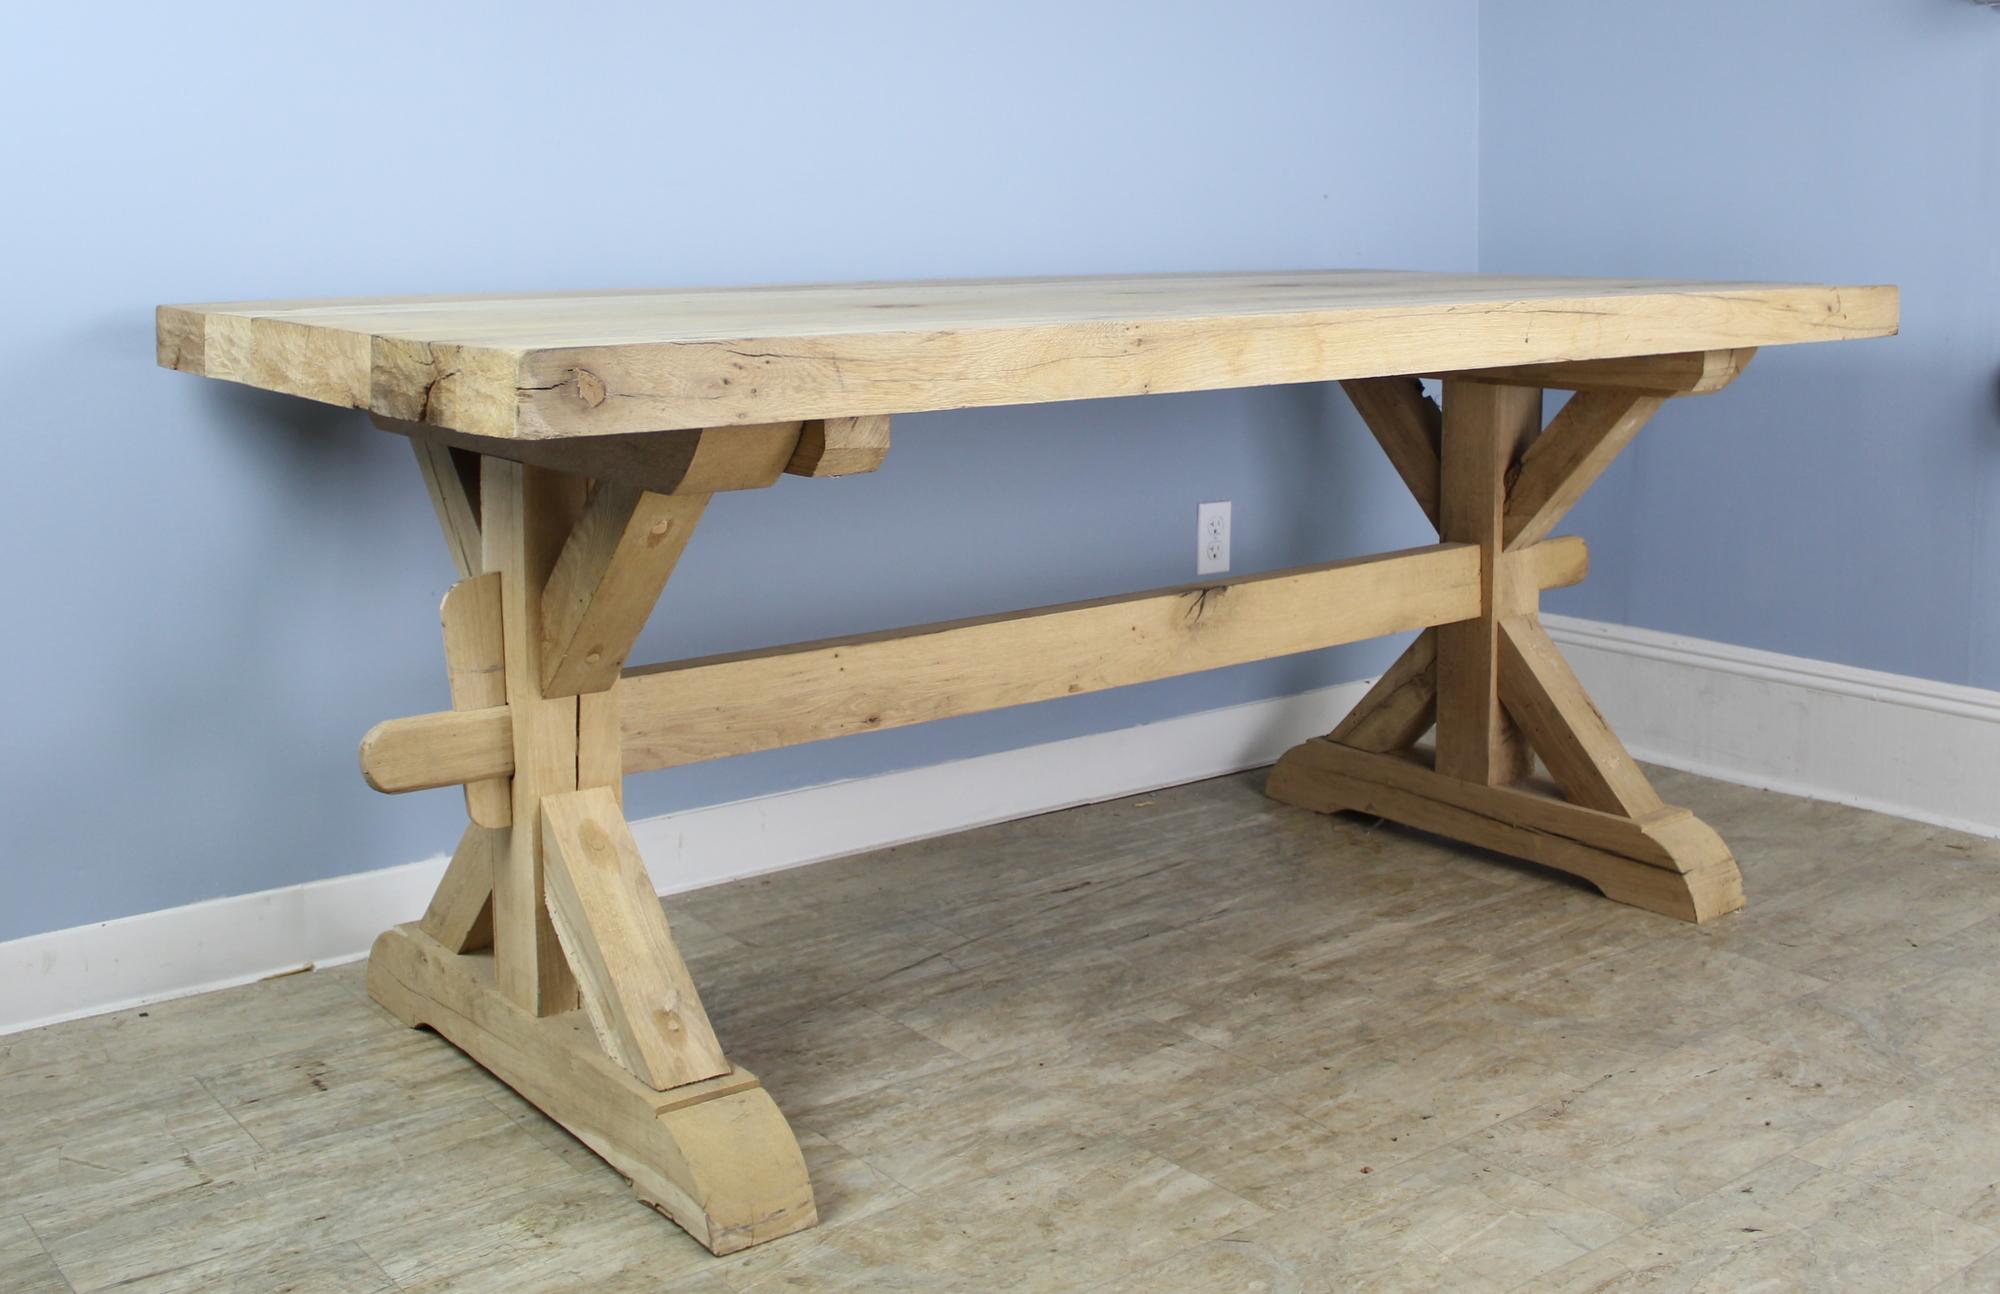 A handsome bleached oak farm table with an Arts & Crafts style trestle base and a 2.5 inch thick top. The piece has very good oak grain throughout and the light wood gives it a modern sensibility. No apron or legs means this table can accommodate 8